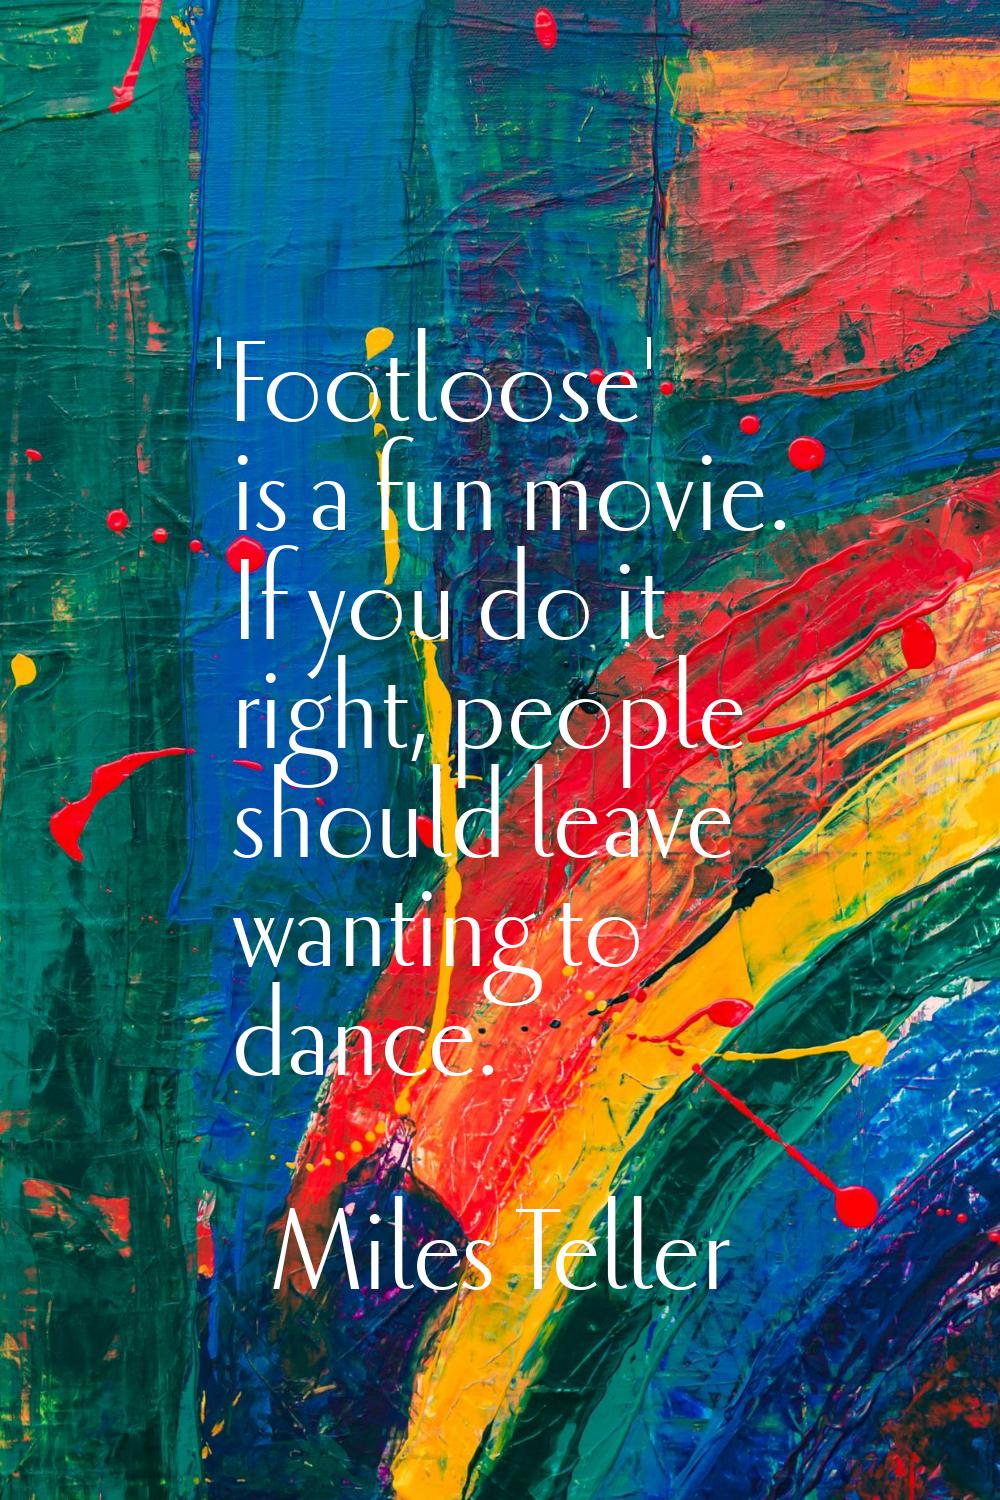 'Footloose' is a fun movie. If you do it right, people should leave wanting to dance.